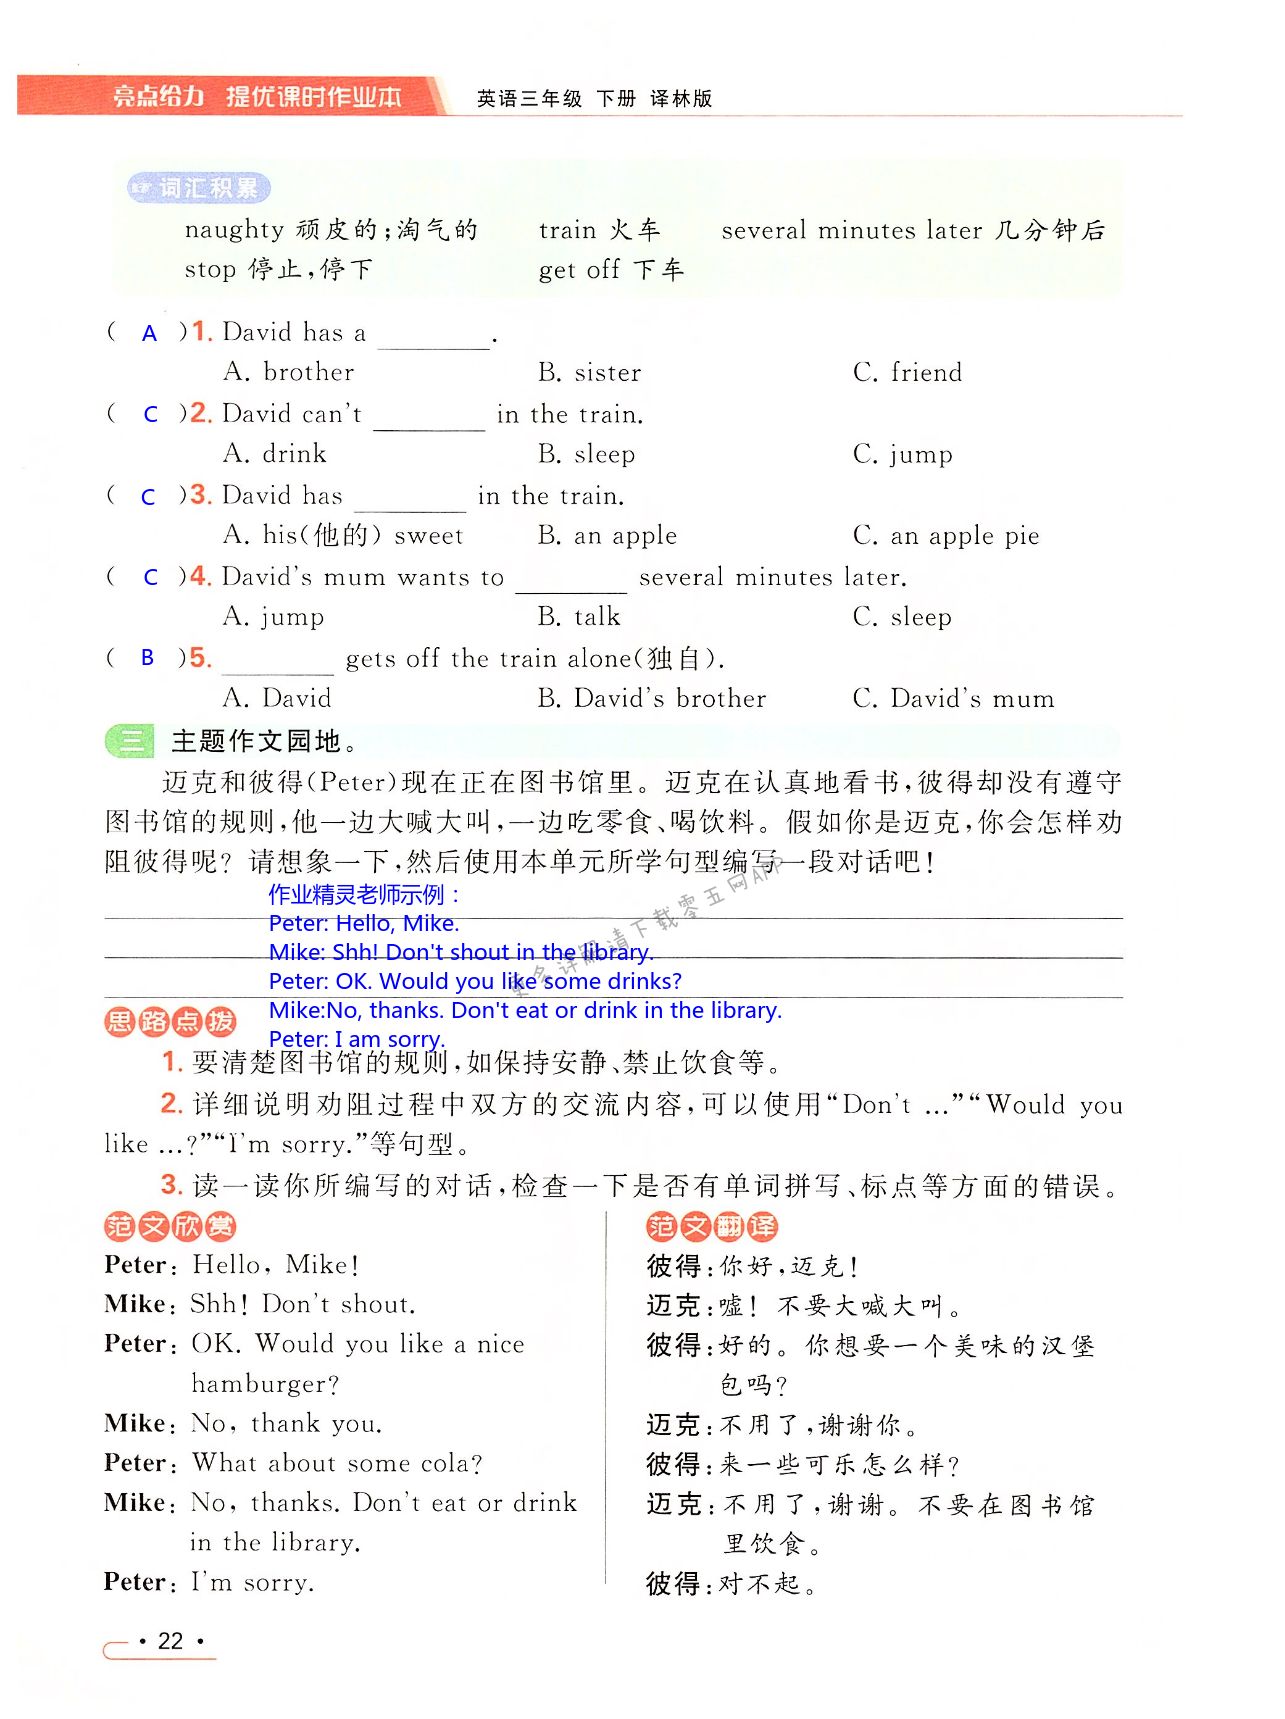 Unit 2 In the library - 第22页